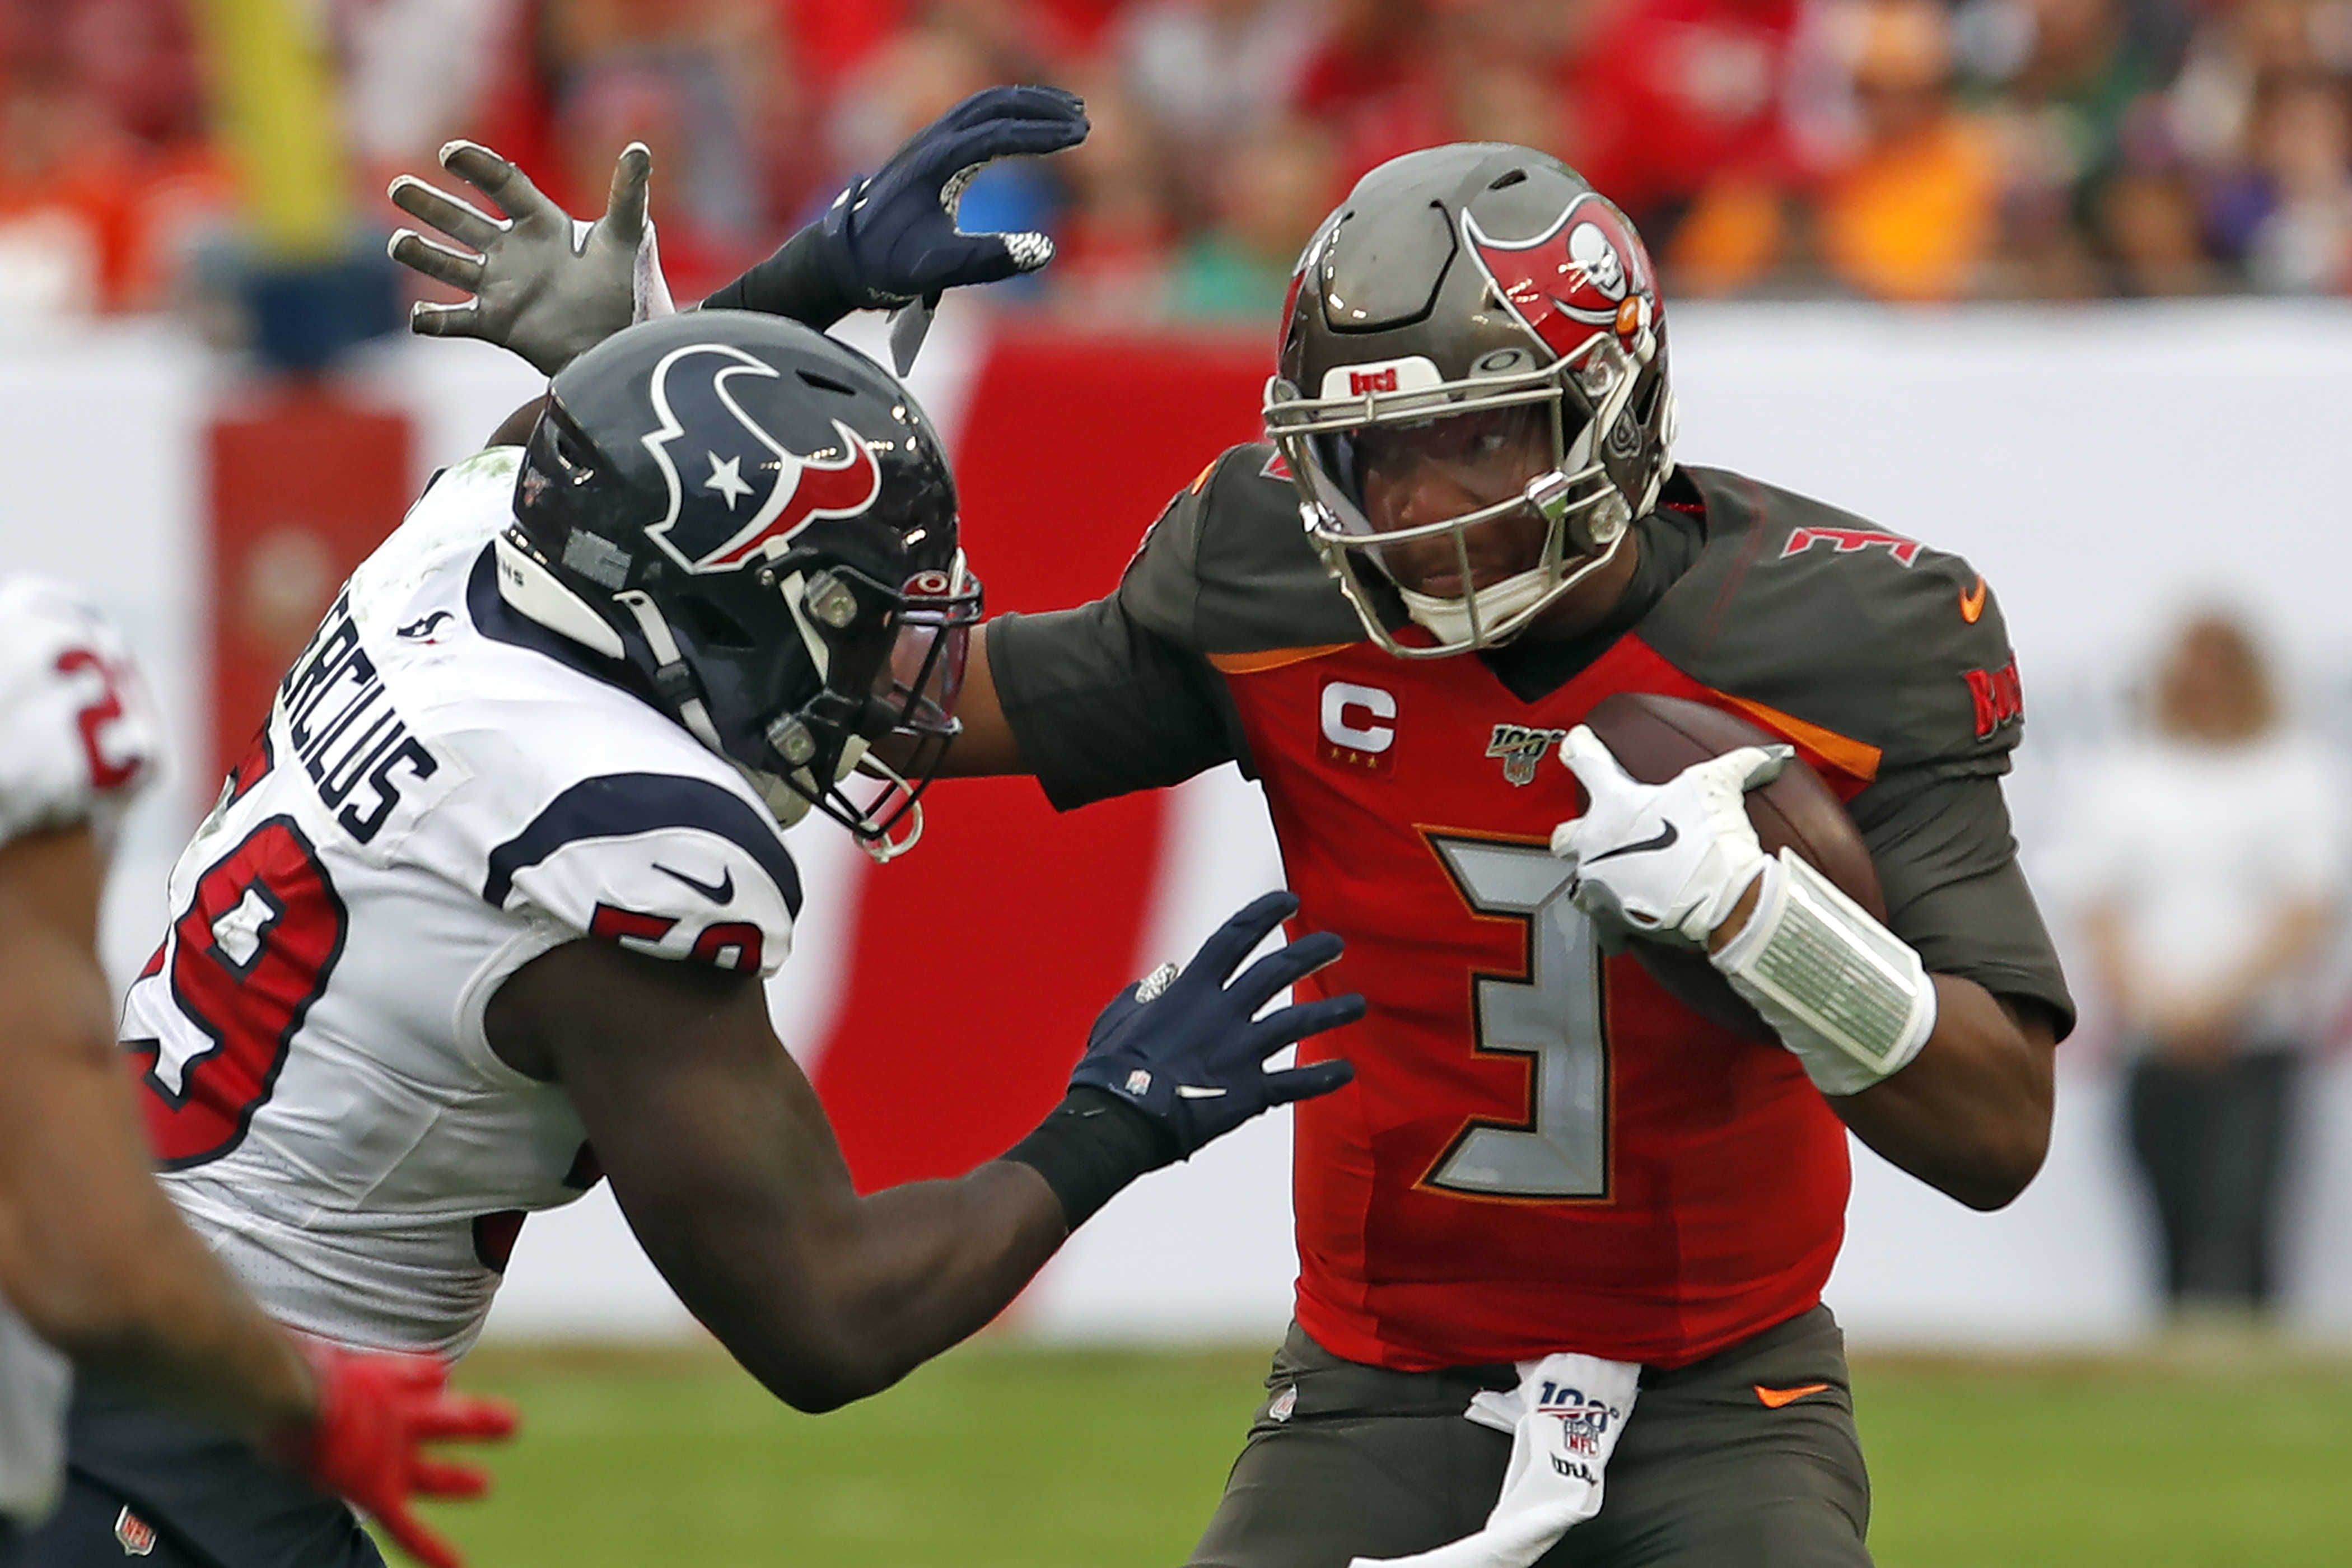 Mistake-prone Bucs turn it over 5 times in loss to Texans